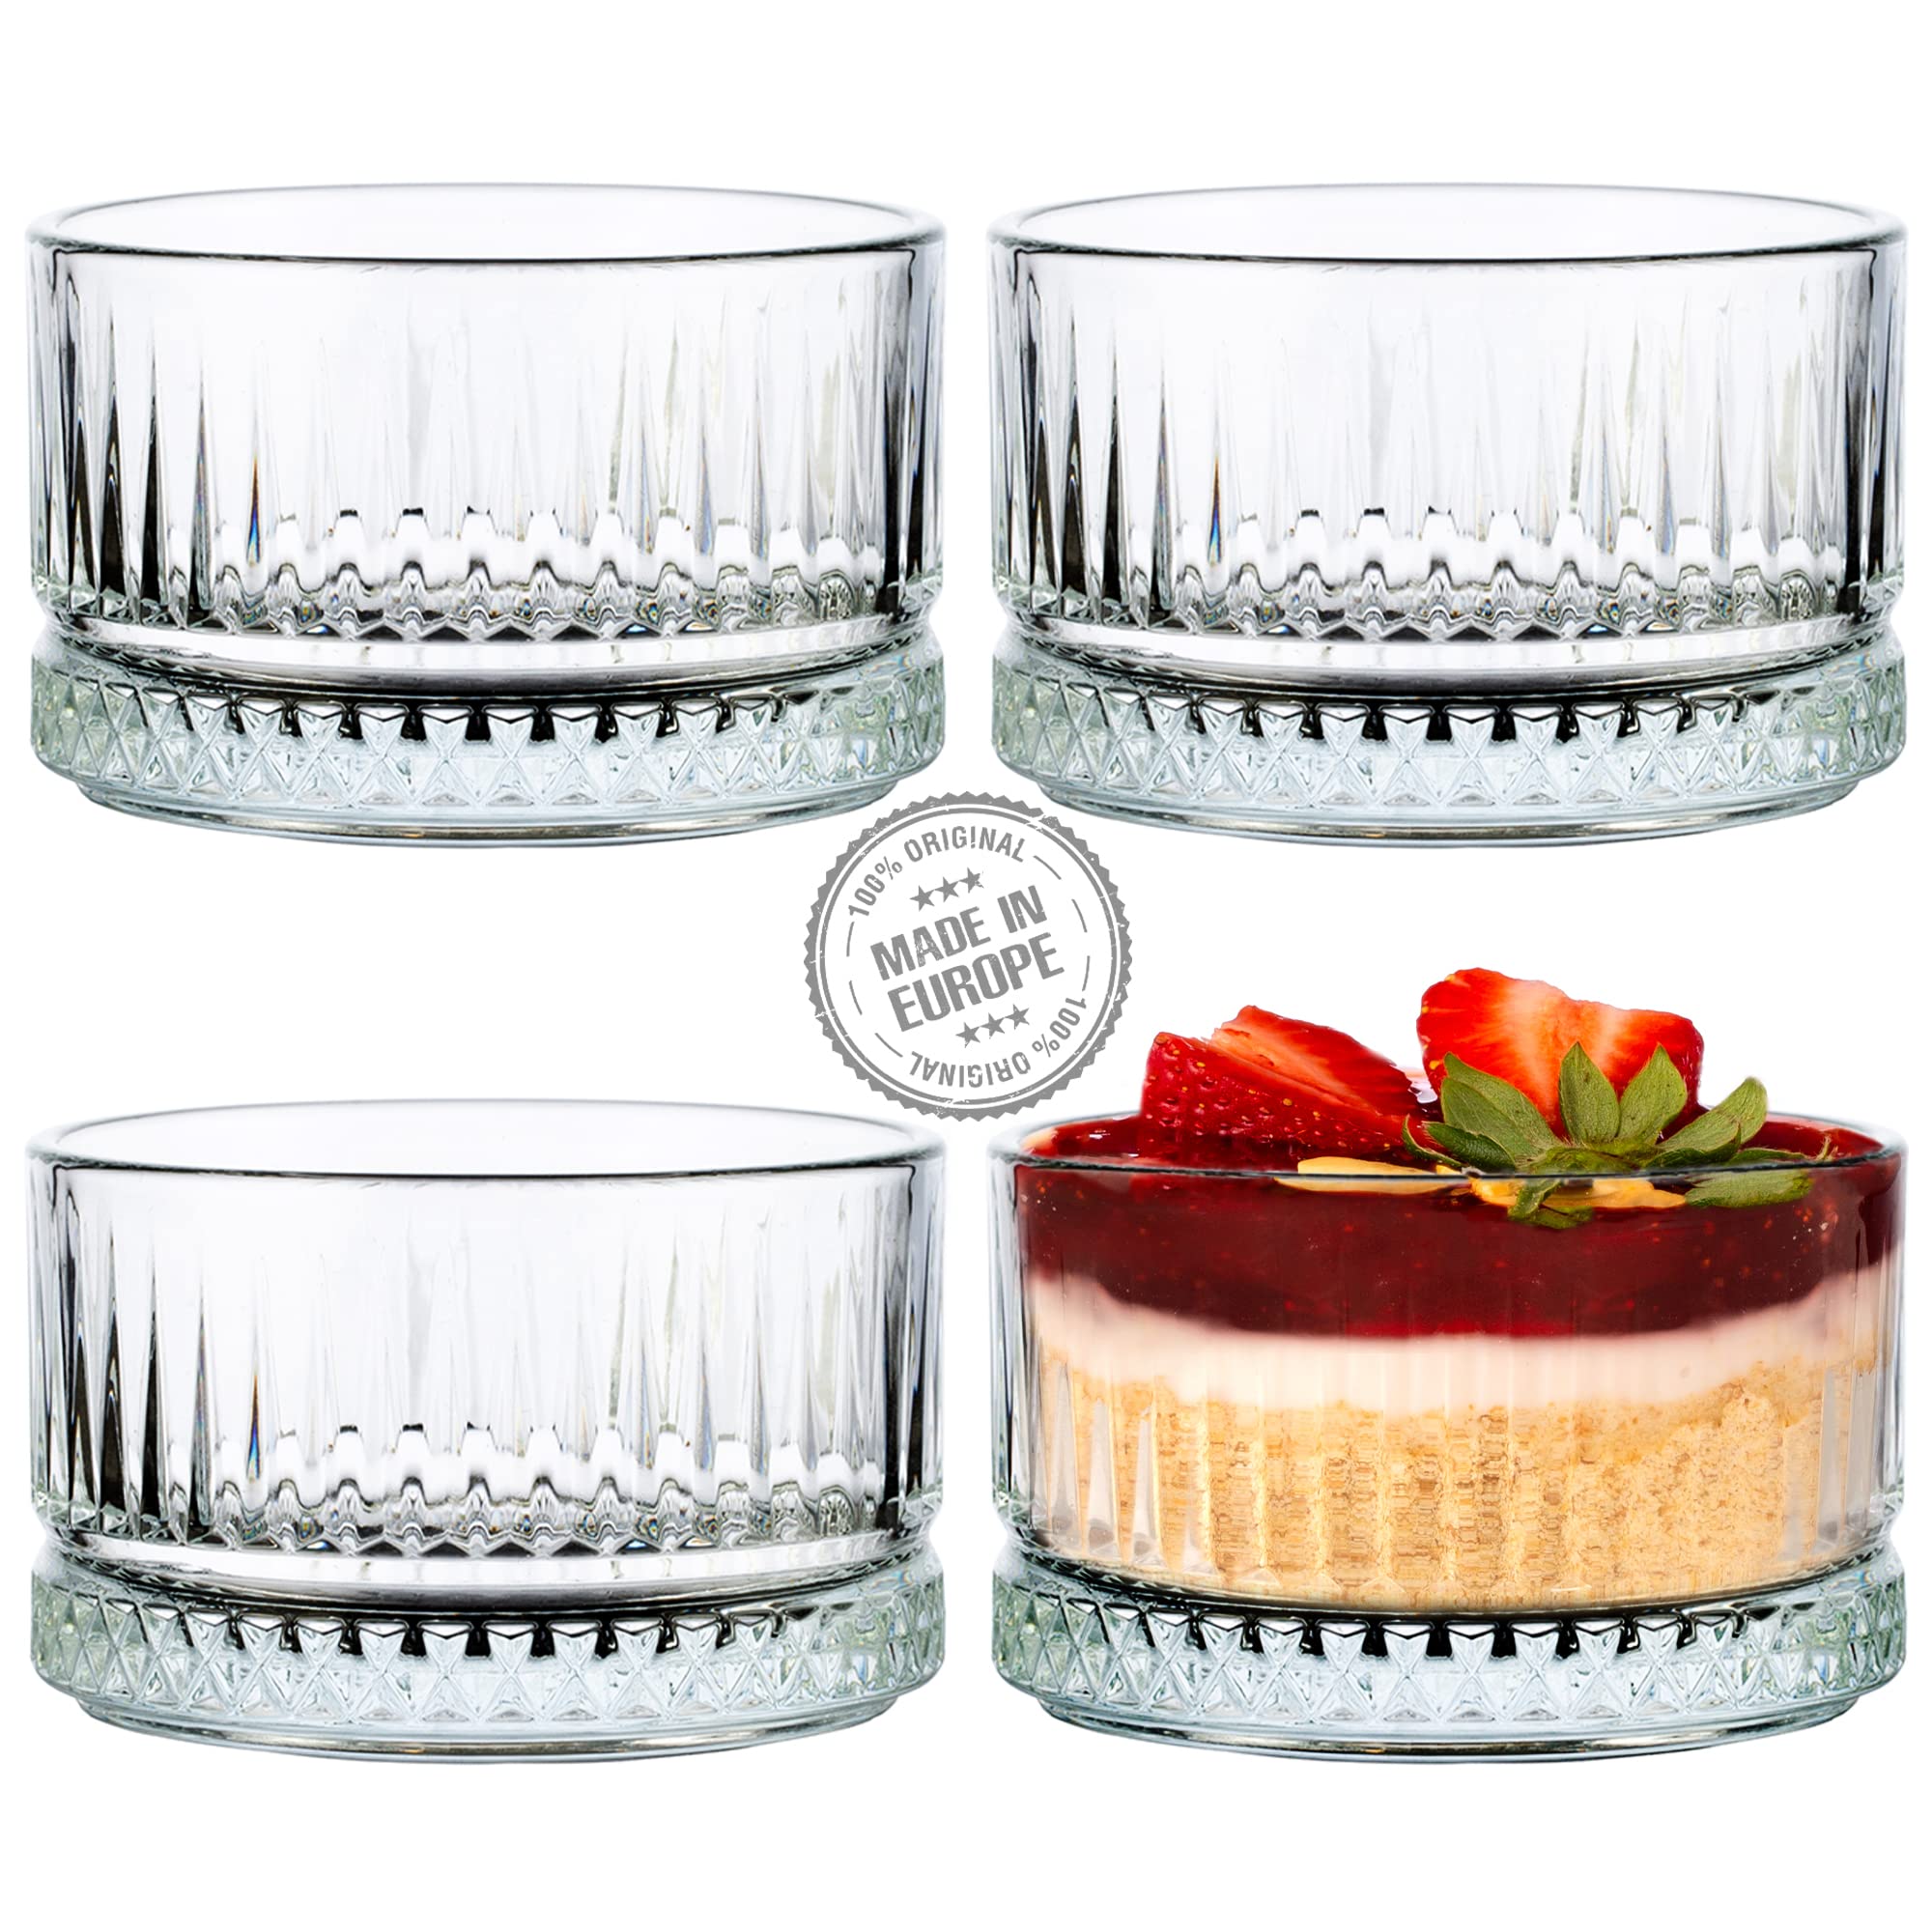 Crystal Bowls Set for Kitchen Prep, Glass Pinch Bowls for Cooking and Serving, Great for Salad, Sauce, Dipping, Dessert and Side Dishes, Set of 4